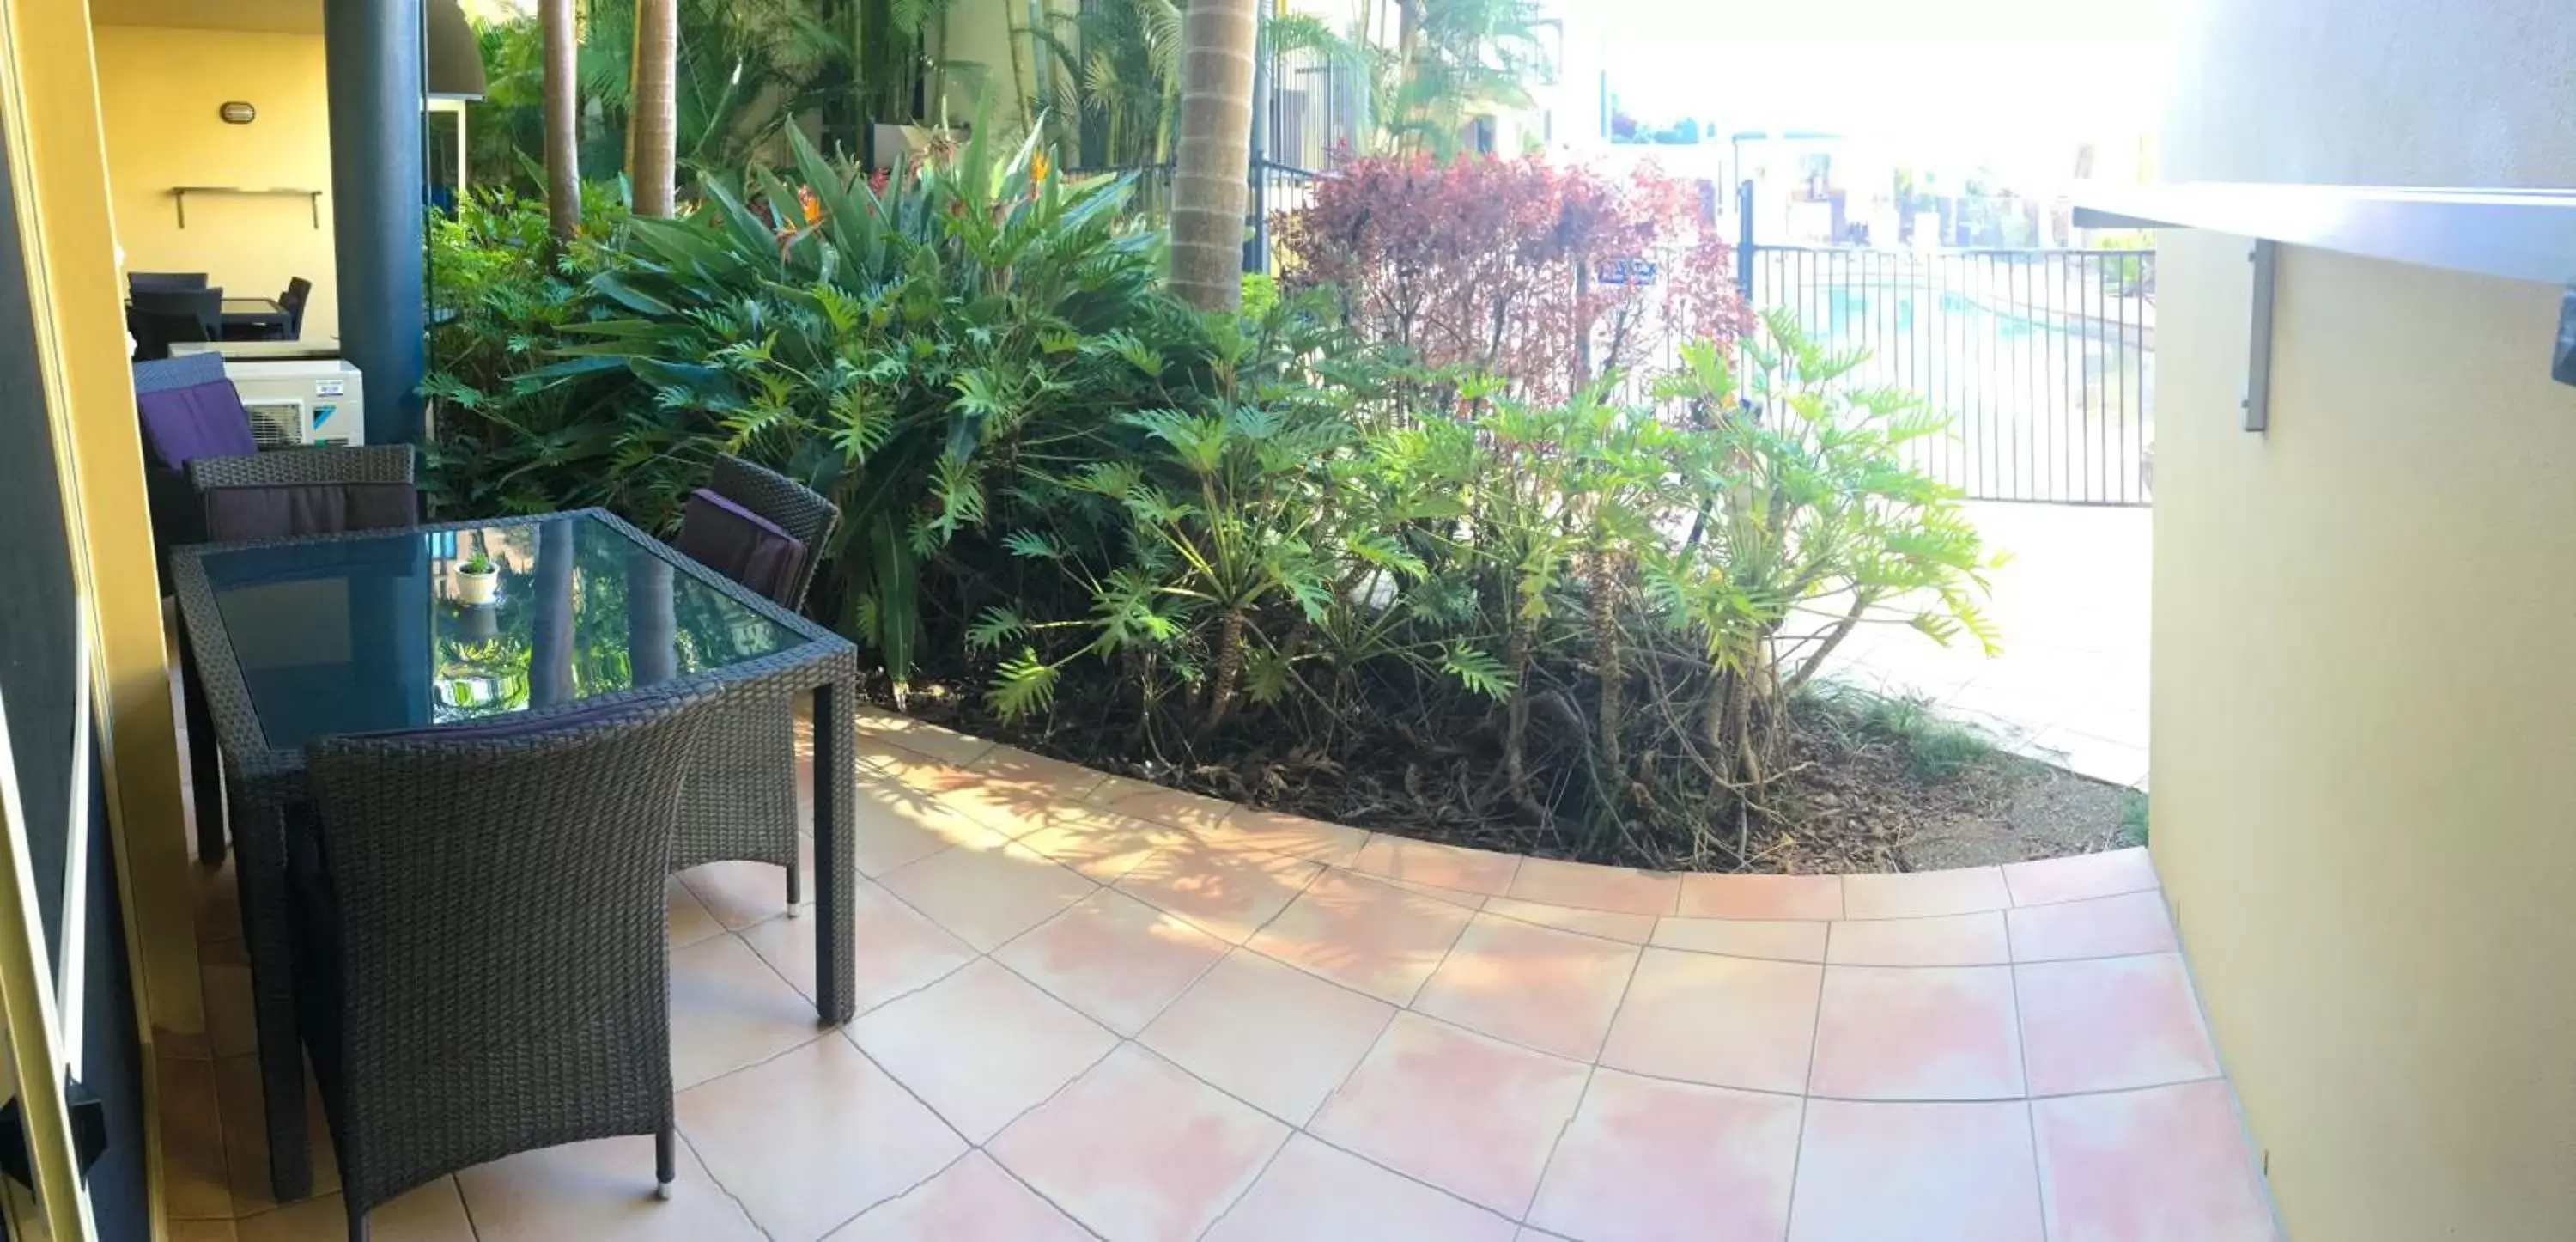 Property building, Patio/Outdoor Area in Beachside Holiday Apartments